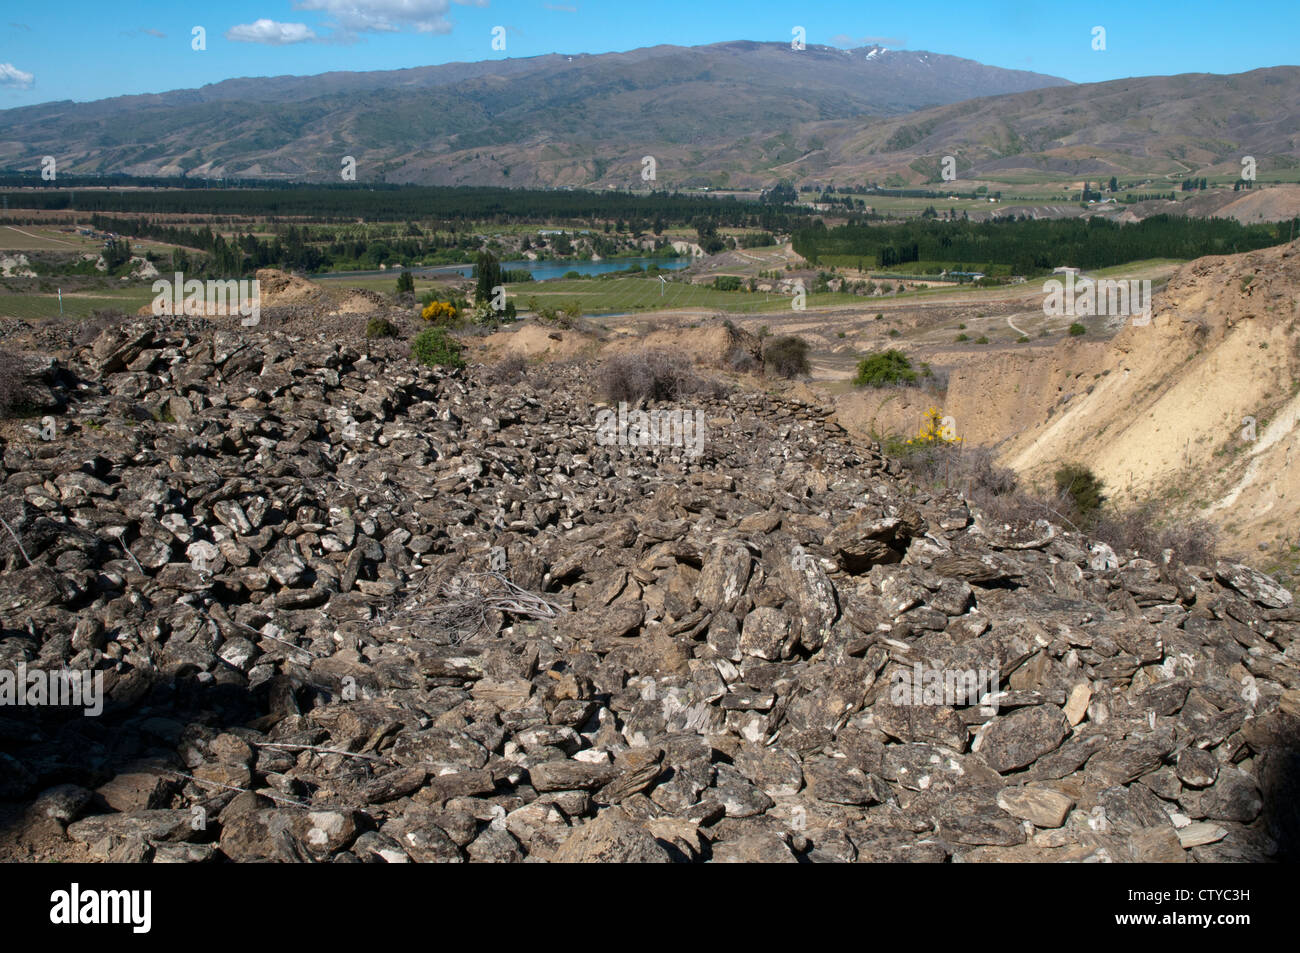 In the 1860s goldminers washed away major parts of the alluvial landscape near Cromwell in Central Otago in New Zealand. Stock Photo